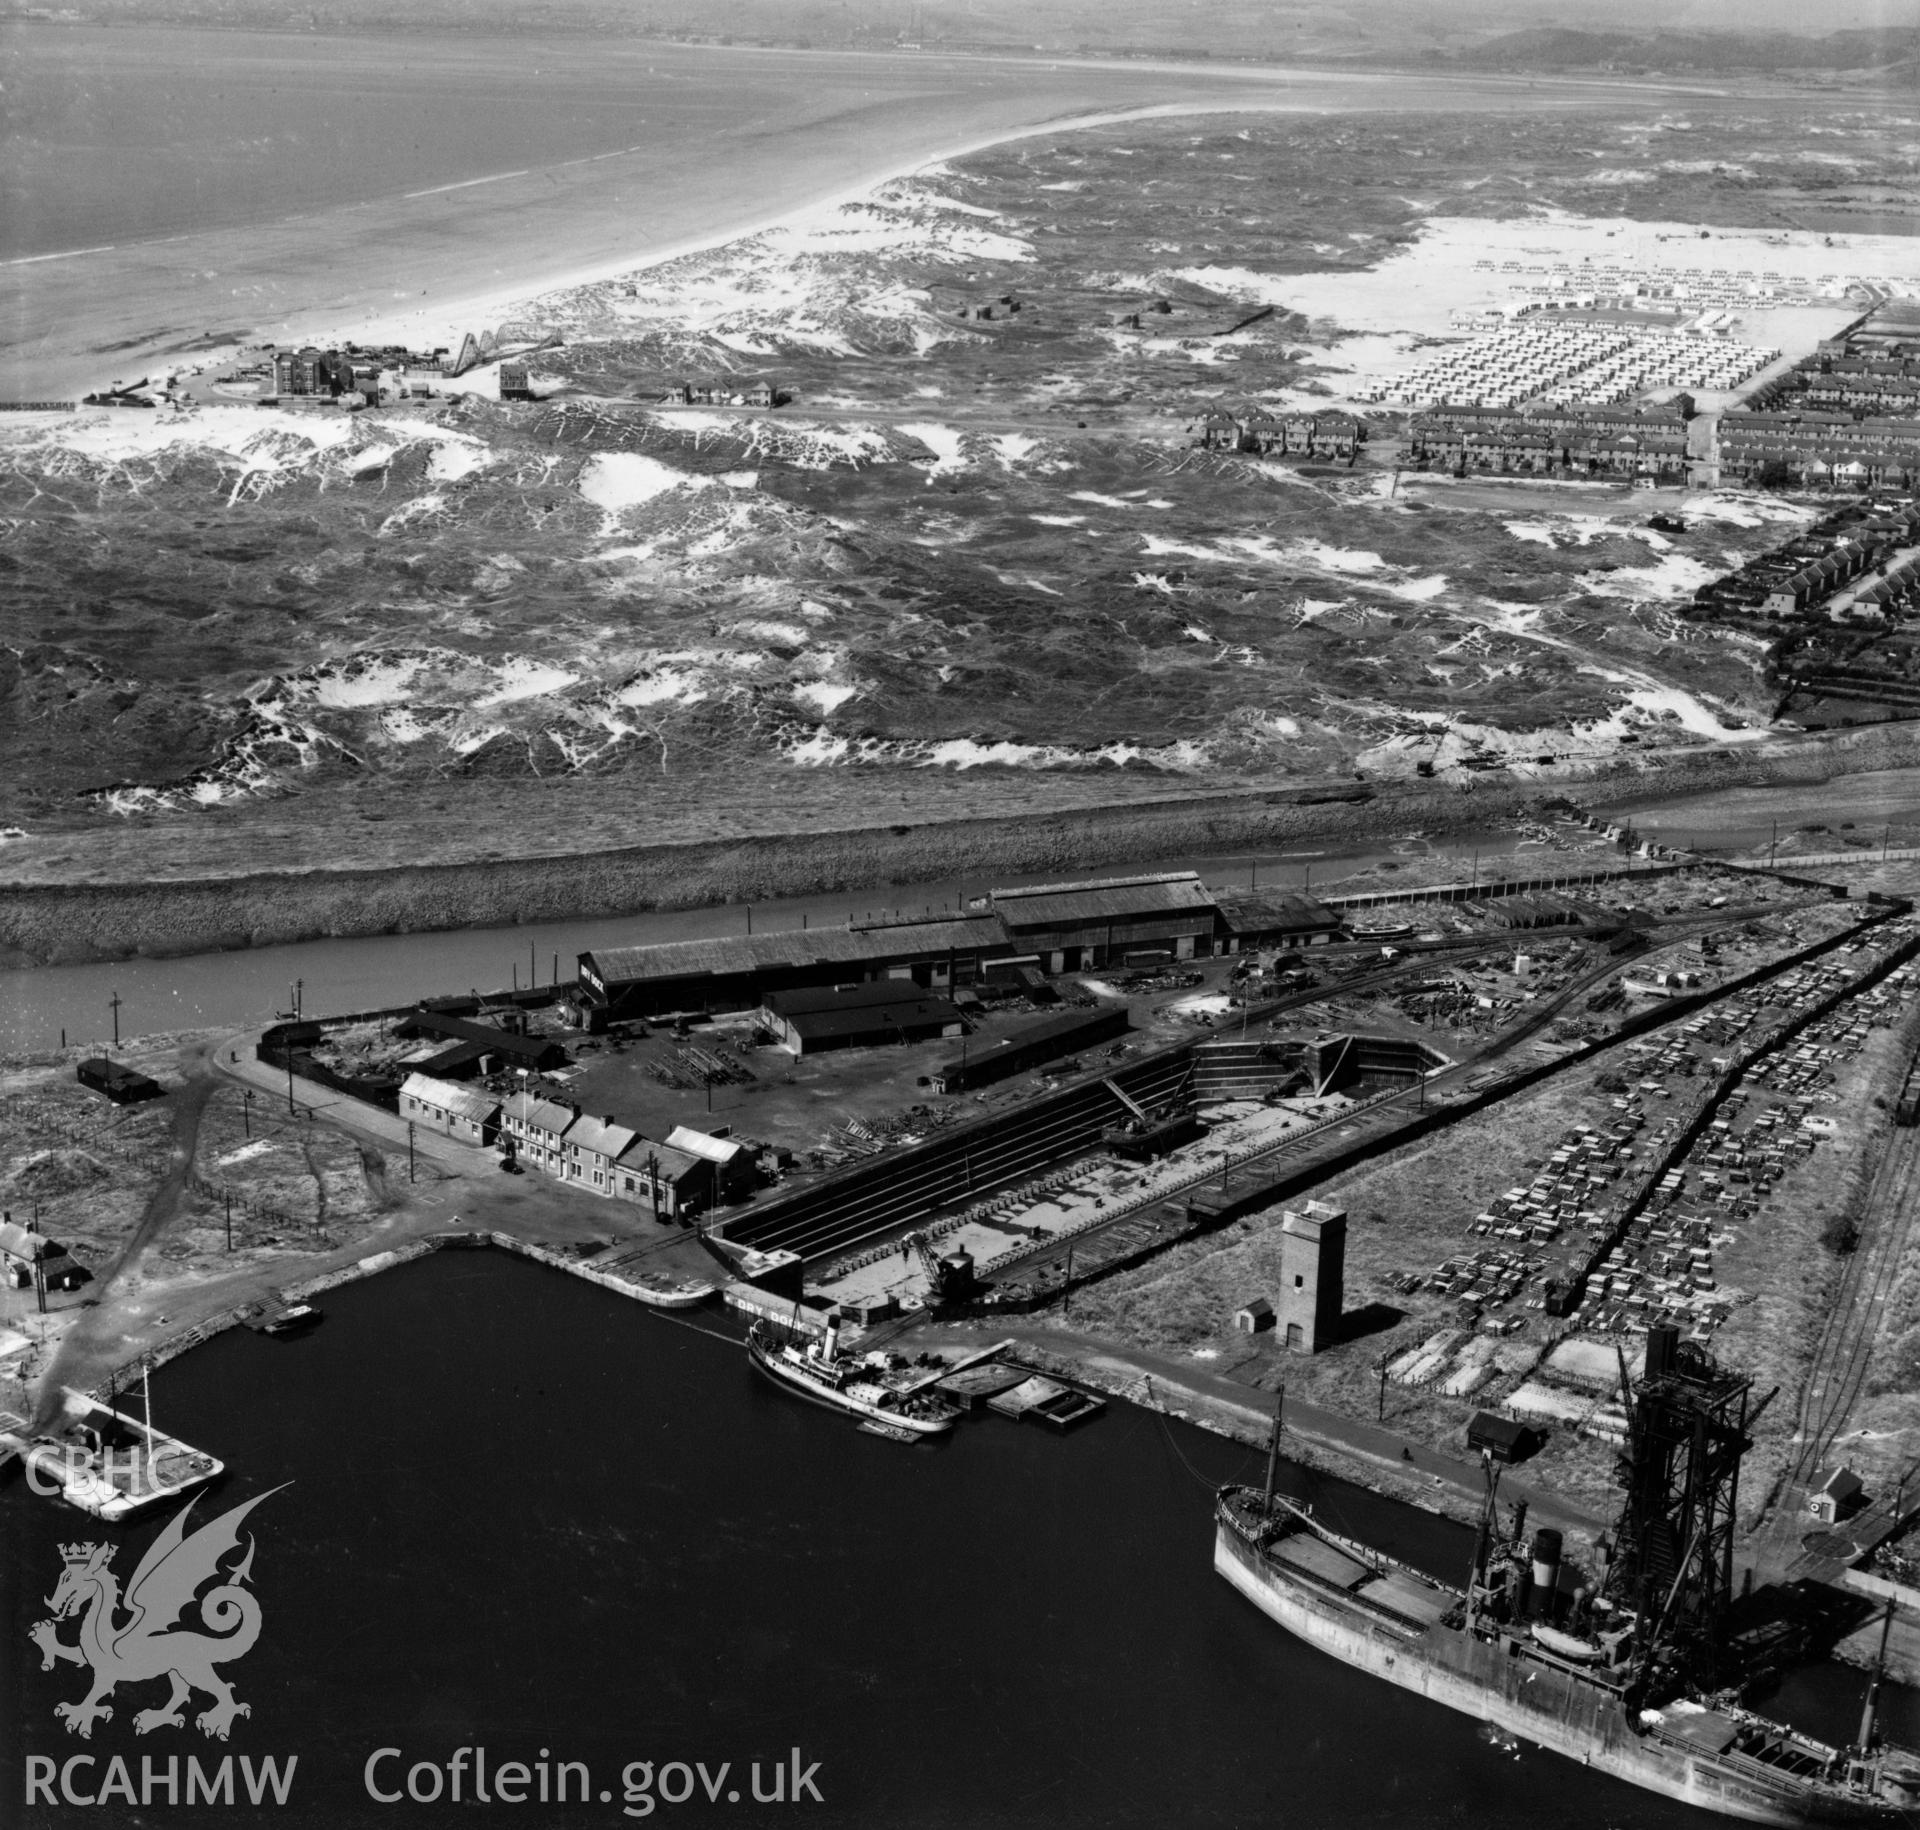 View of docks, Port Talbot, showing derelict Jersey Beach Hotel, funfair and Sandfields estate prefabs at Aberavon in the background. Oblique aerial photograph, 5?" cut roll film.